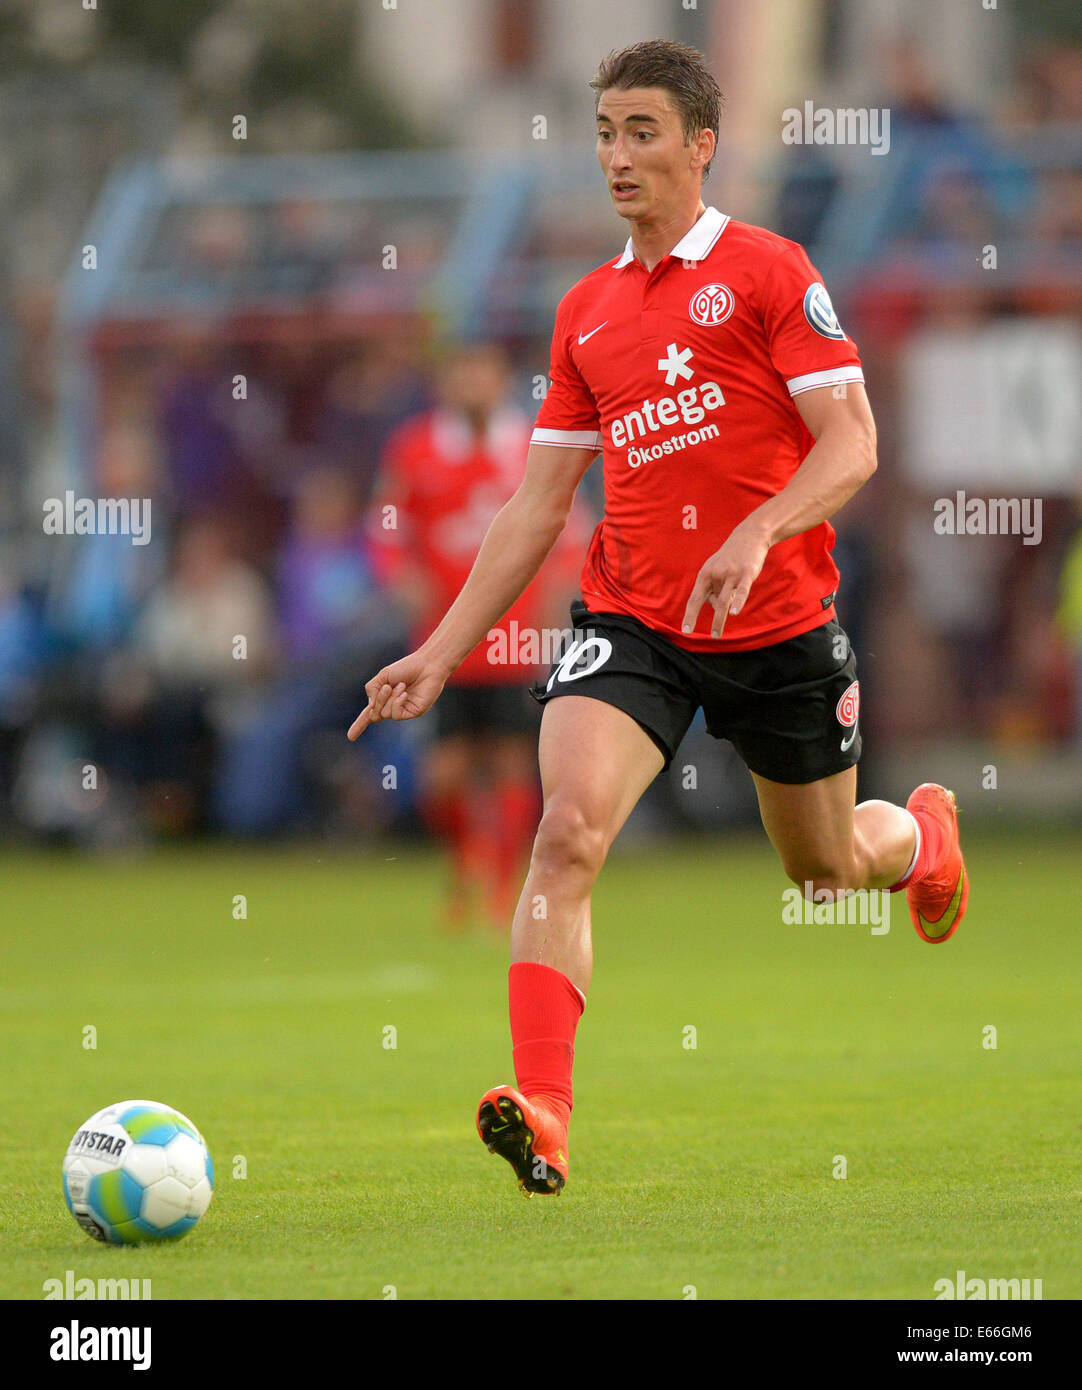 Mainz's Filip Djuricic in action during the DFB Cup first round match between Chemnitzer FC and FSV Mainz 05 in the Stadium on Gellerstrasse in Chemnitz, Germany, 15 August 2014. Photo: THOMAS EISENHUTH/dpa (ATTENTION: The DFB prohibits the utilisation and publication of sequential pictures on the internet and other online media during the match (including half-time). ATTENTION: BLOCKING PERIOD! The DFB permits the further utilisation and publication of the pictures for mobile services (especially MMS) and for DVB-H and DMB only after the end of the match.) Stock Photo